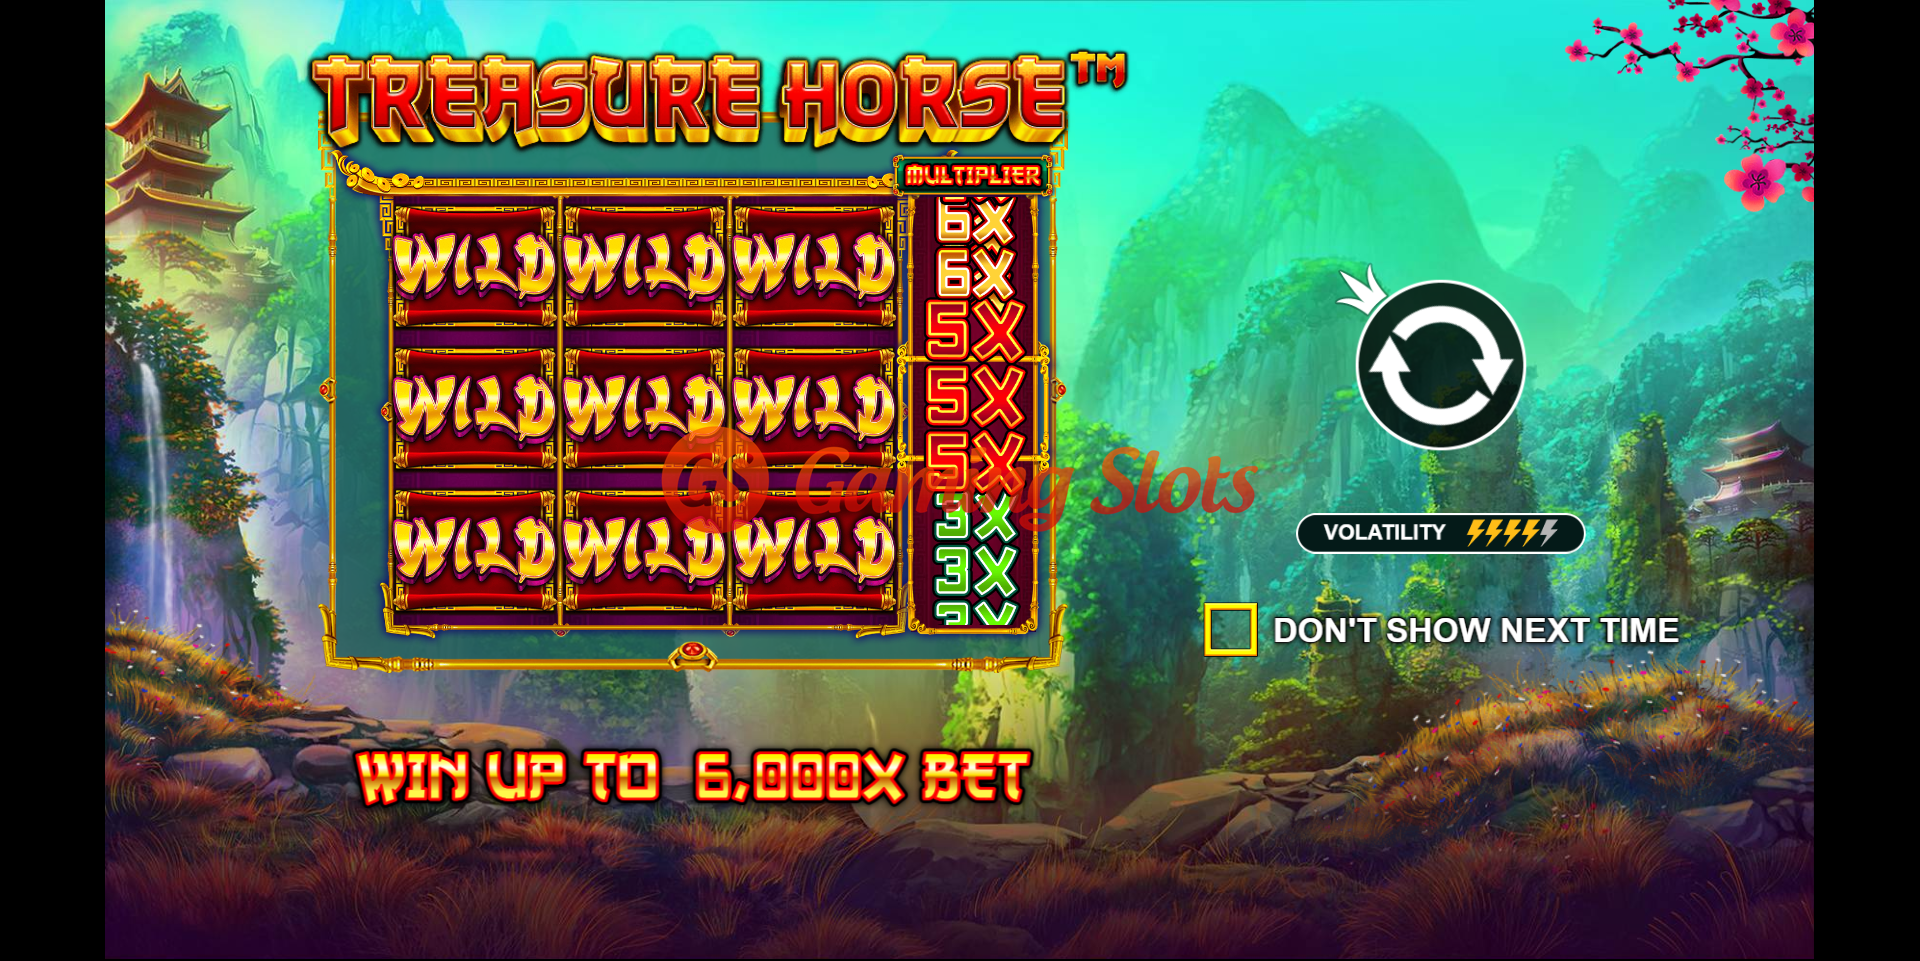 Game Intro for Treasure Horse slot from Pragmatic Play